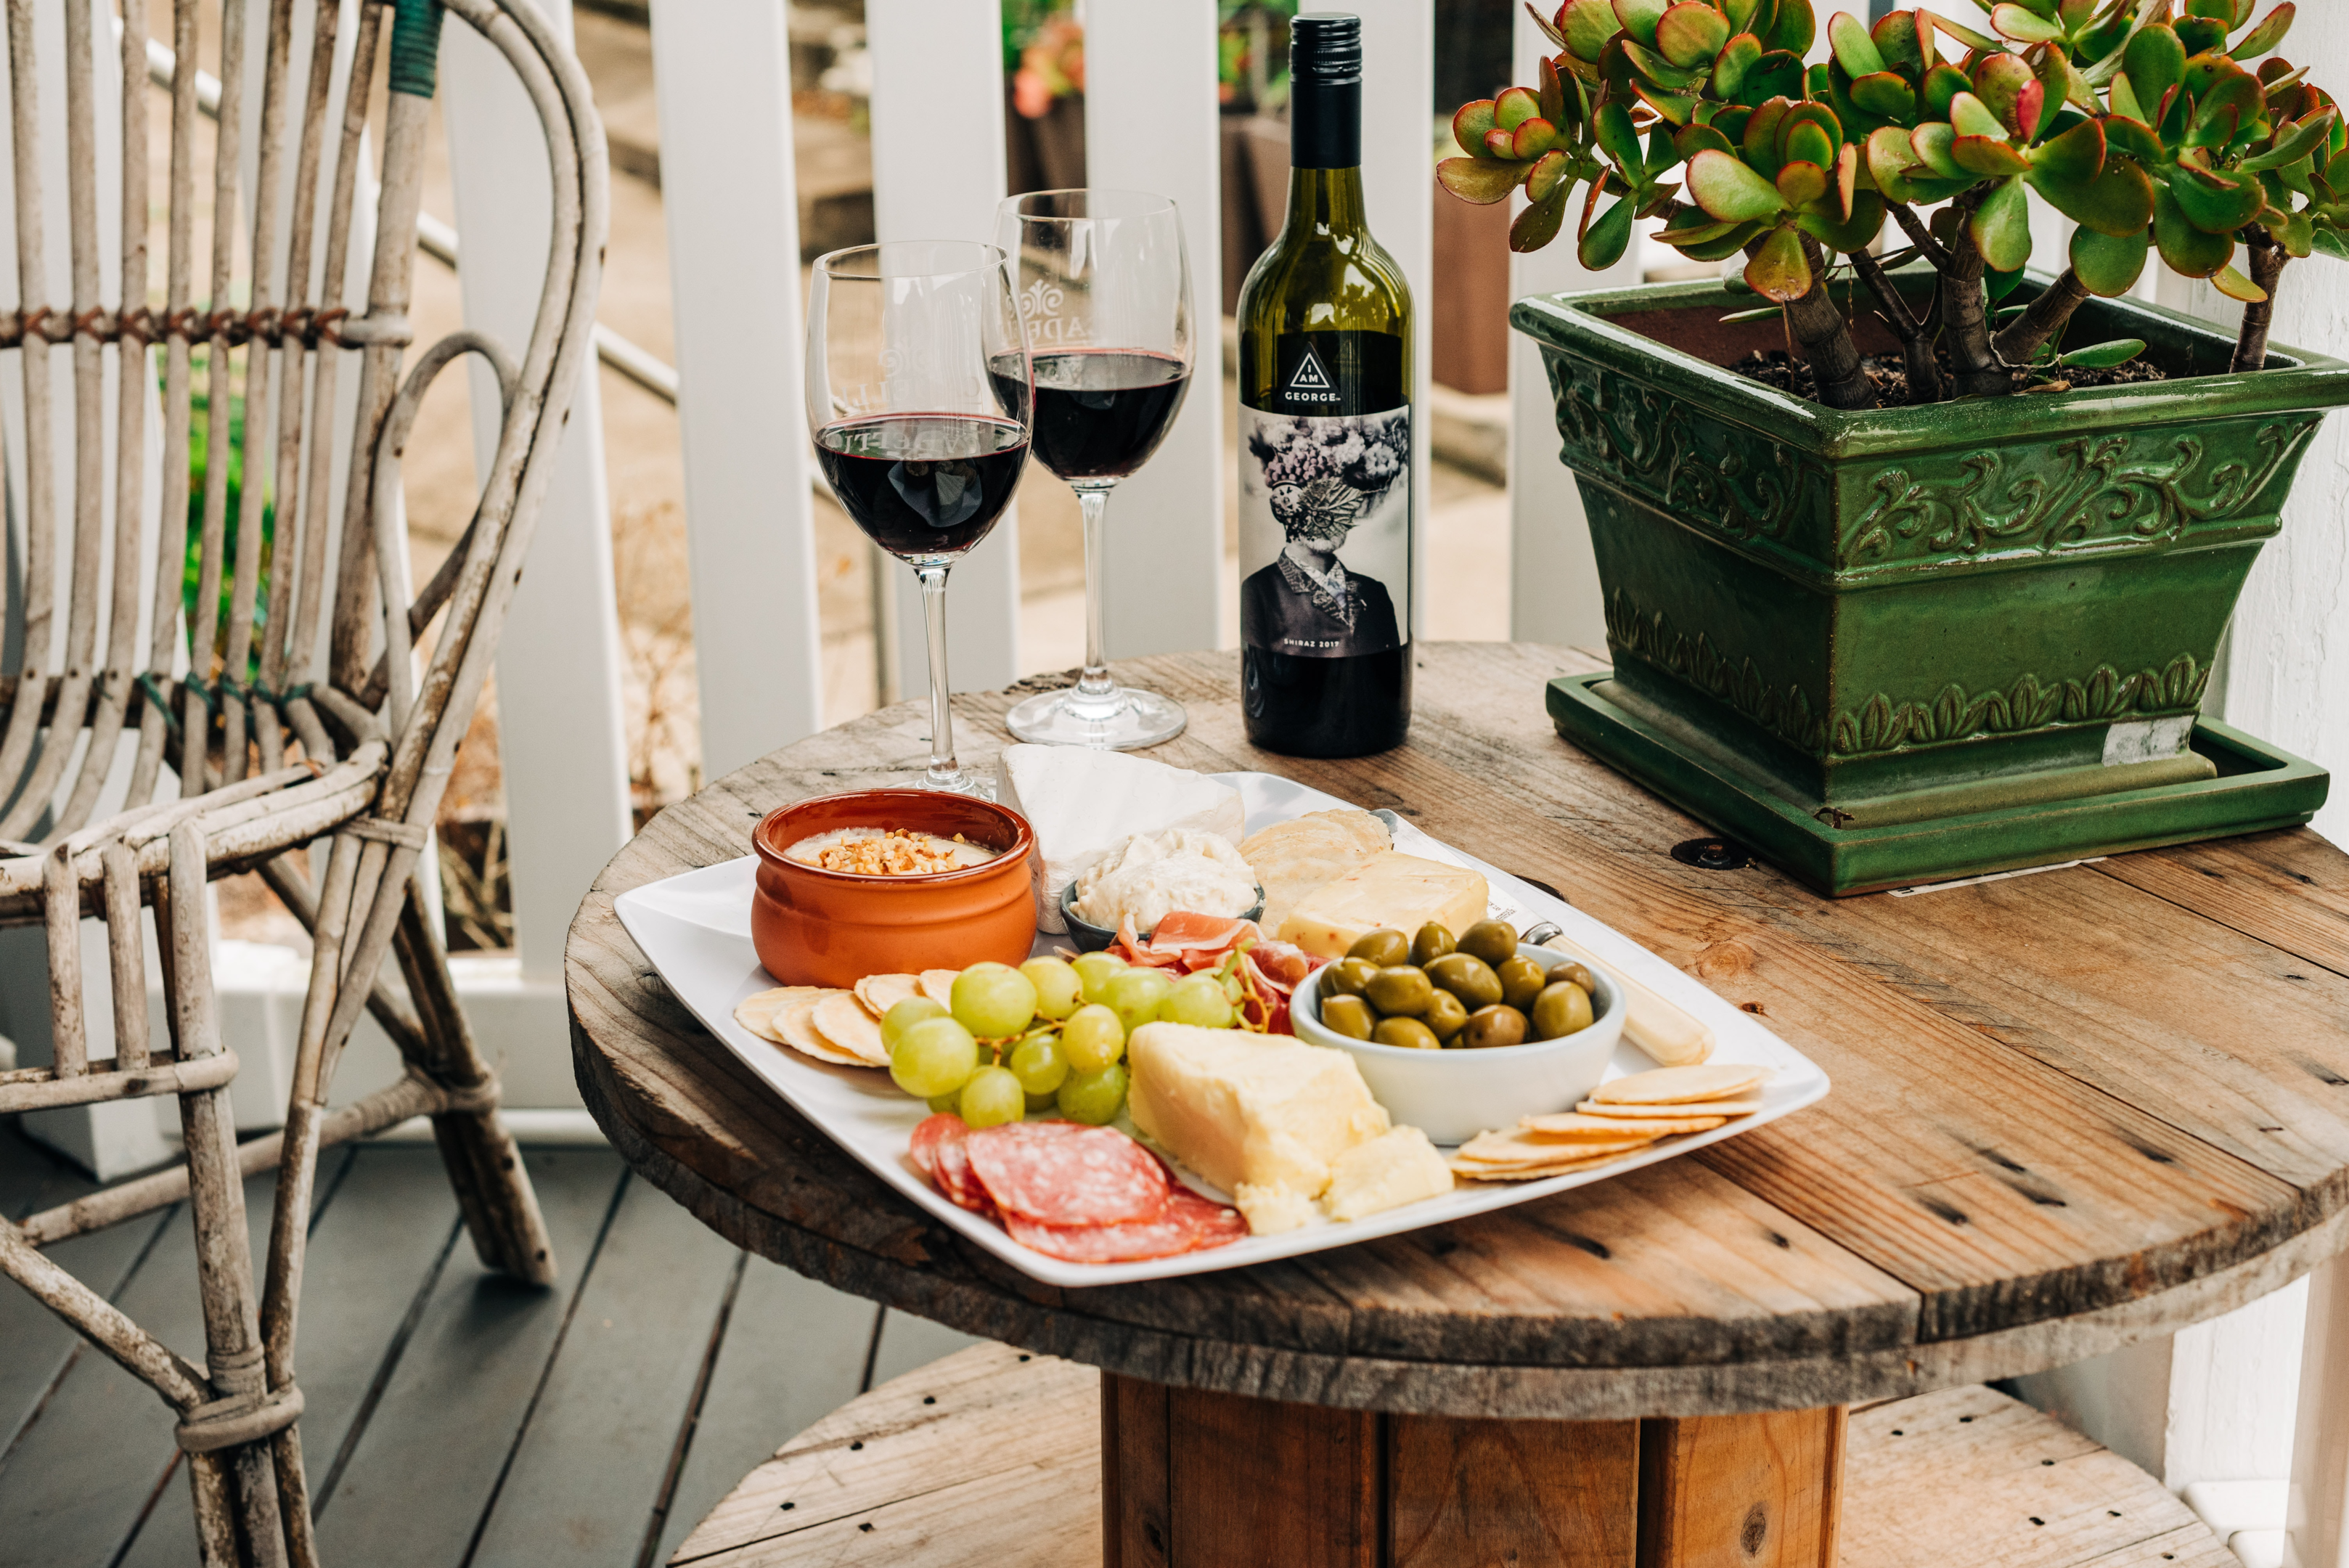 New to outdoor dining at home? Learn how to set up the perfect al fresco table within your backyard using these tips. 